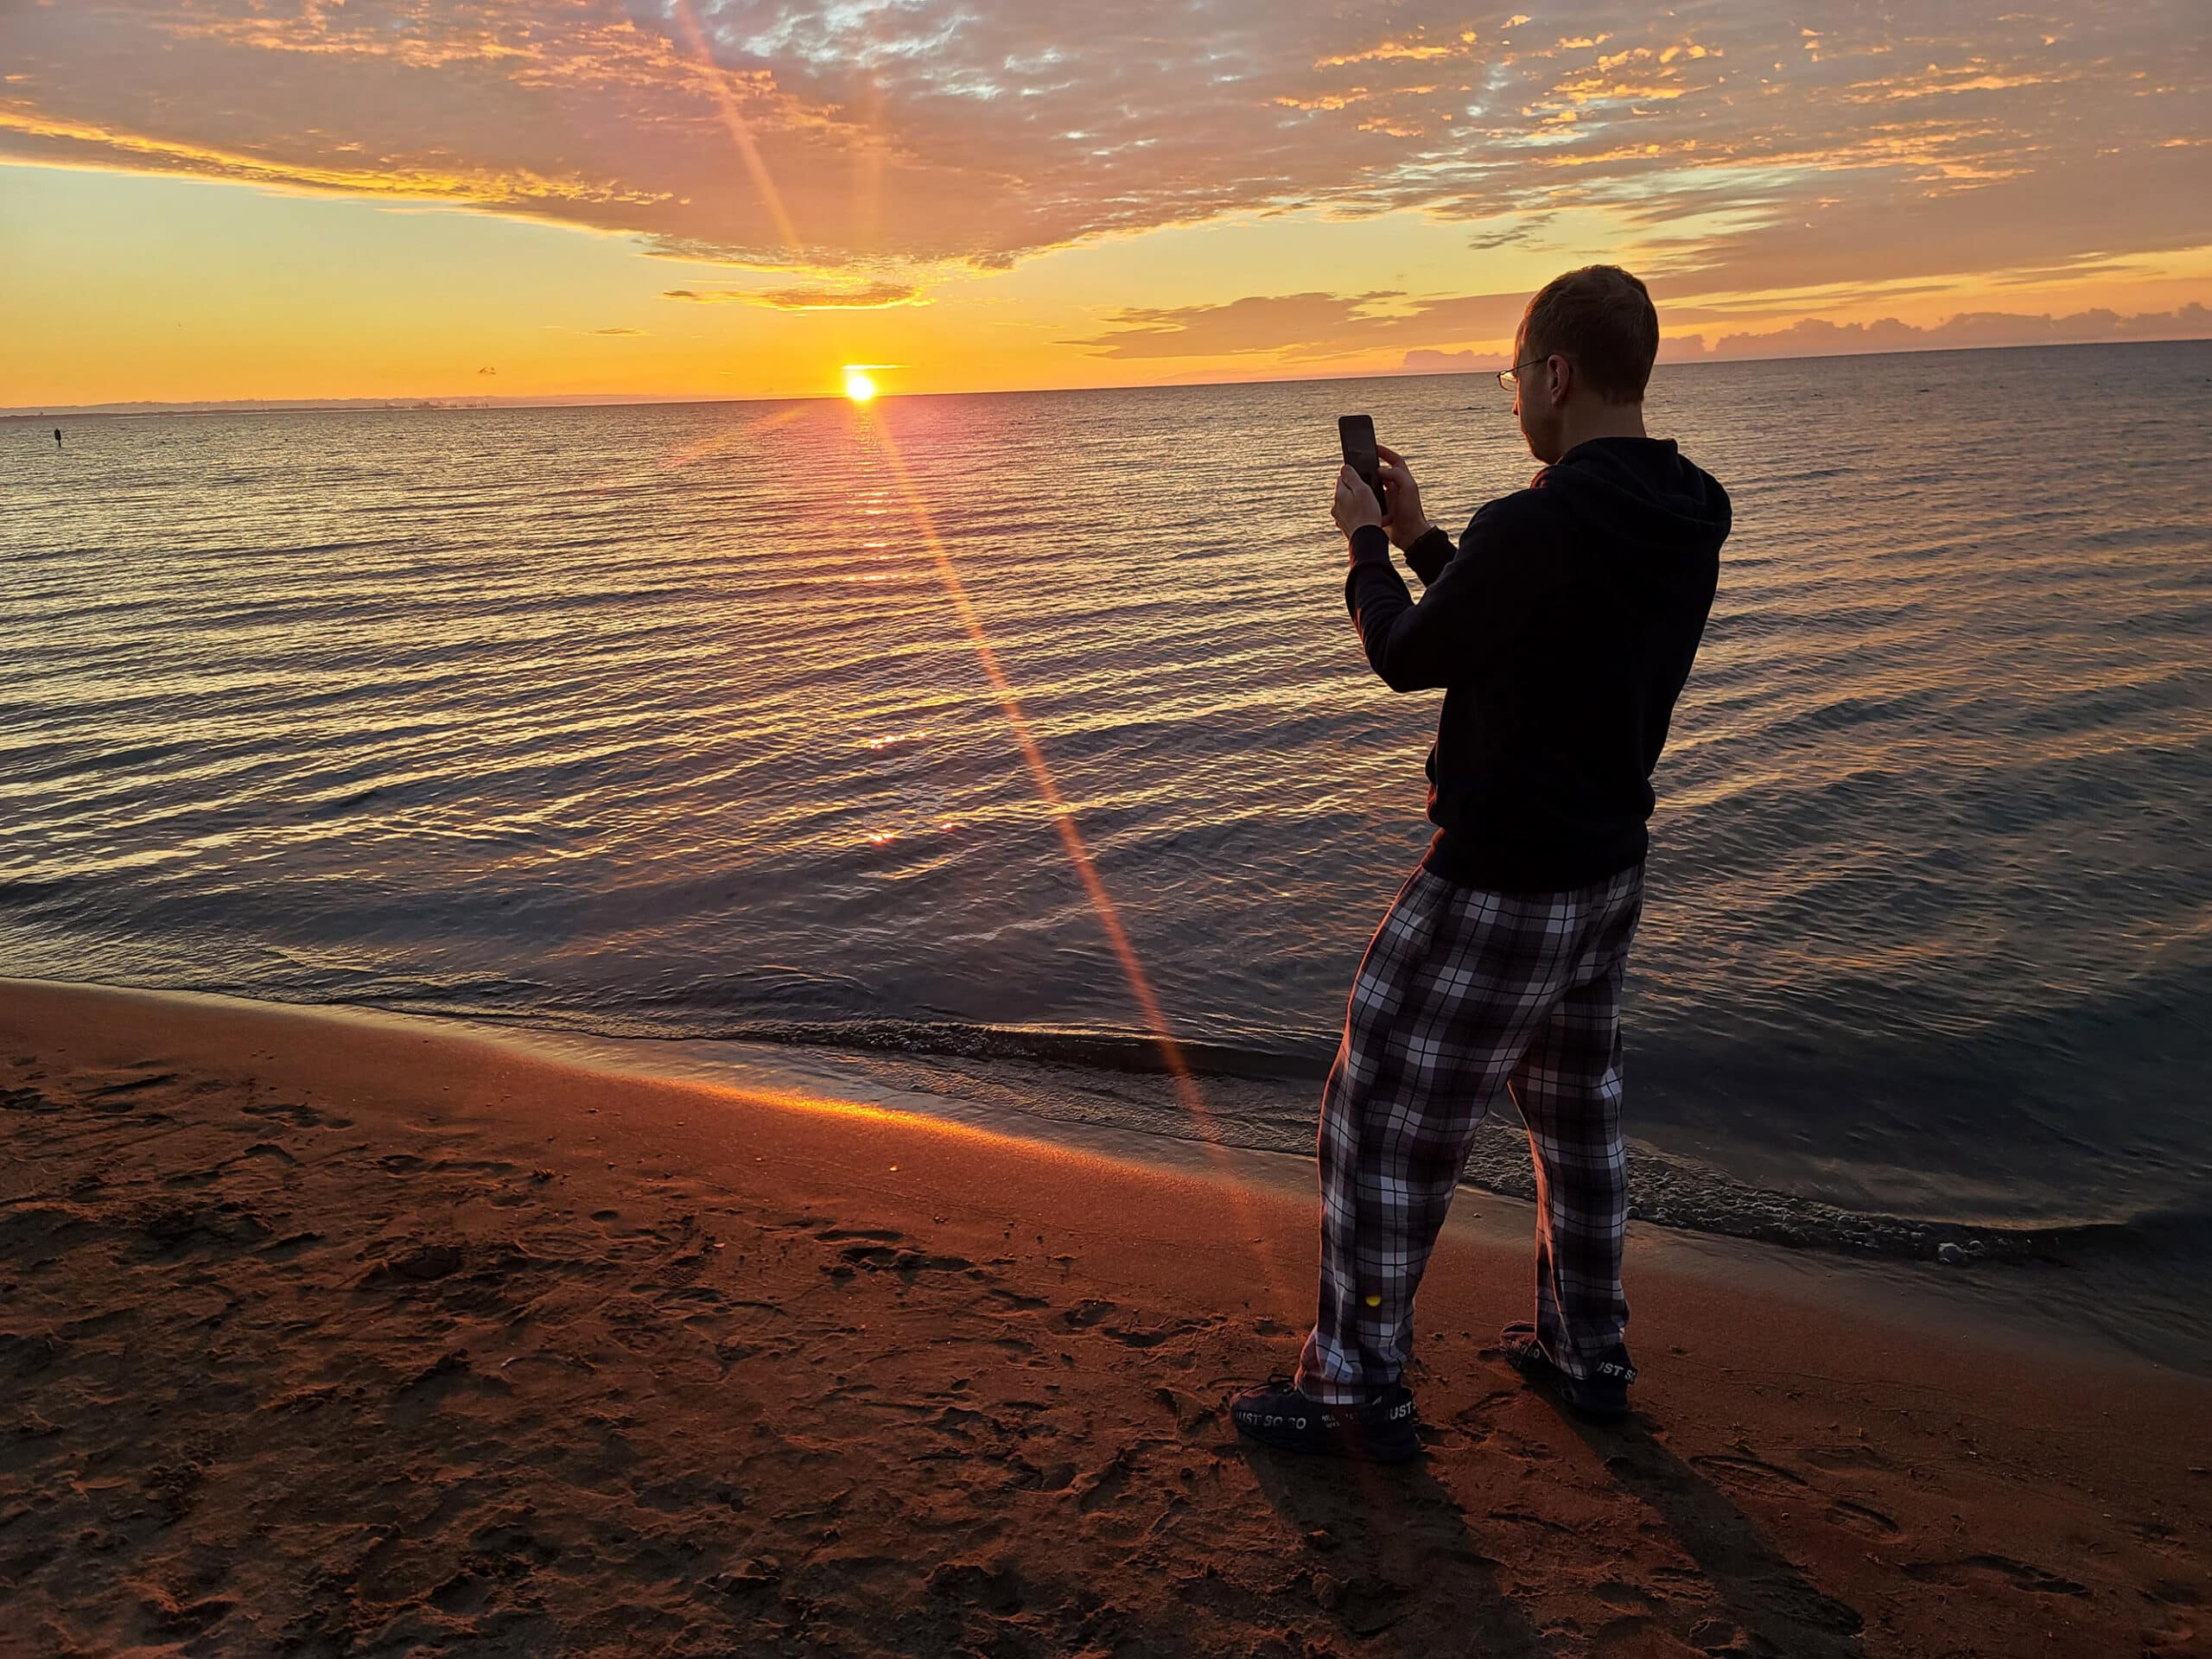 The sun rising over turkey point beach. A man in the foreground is photographing the sunrise.